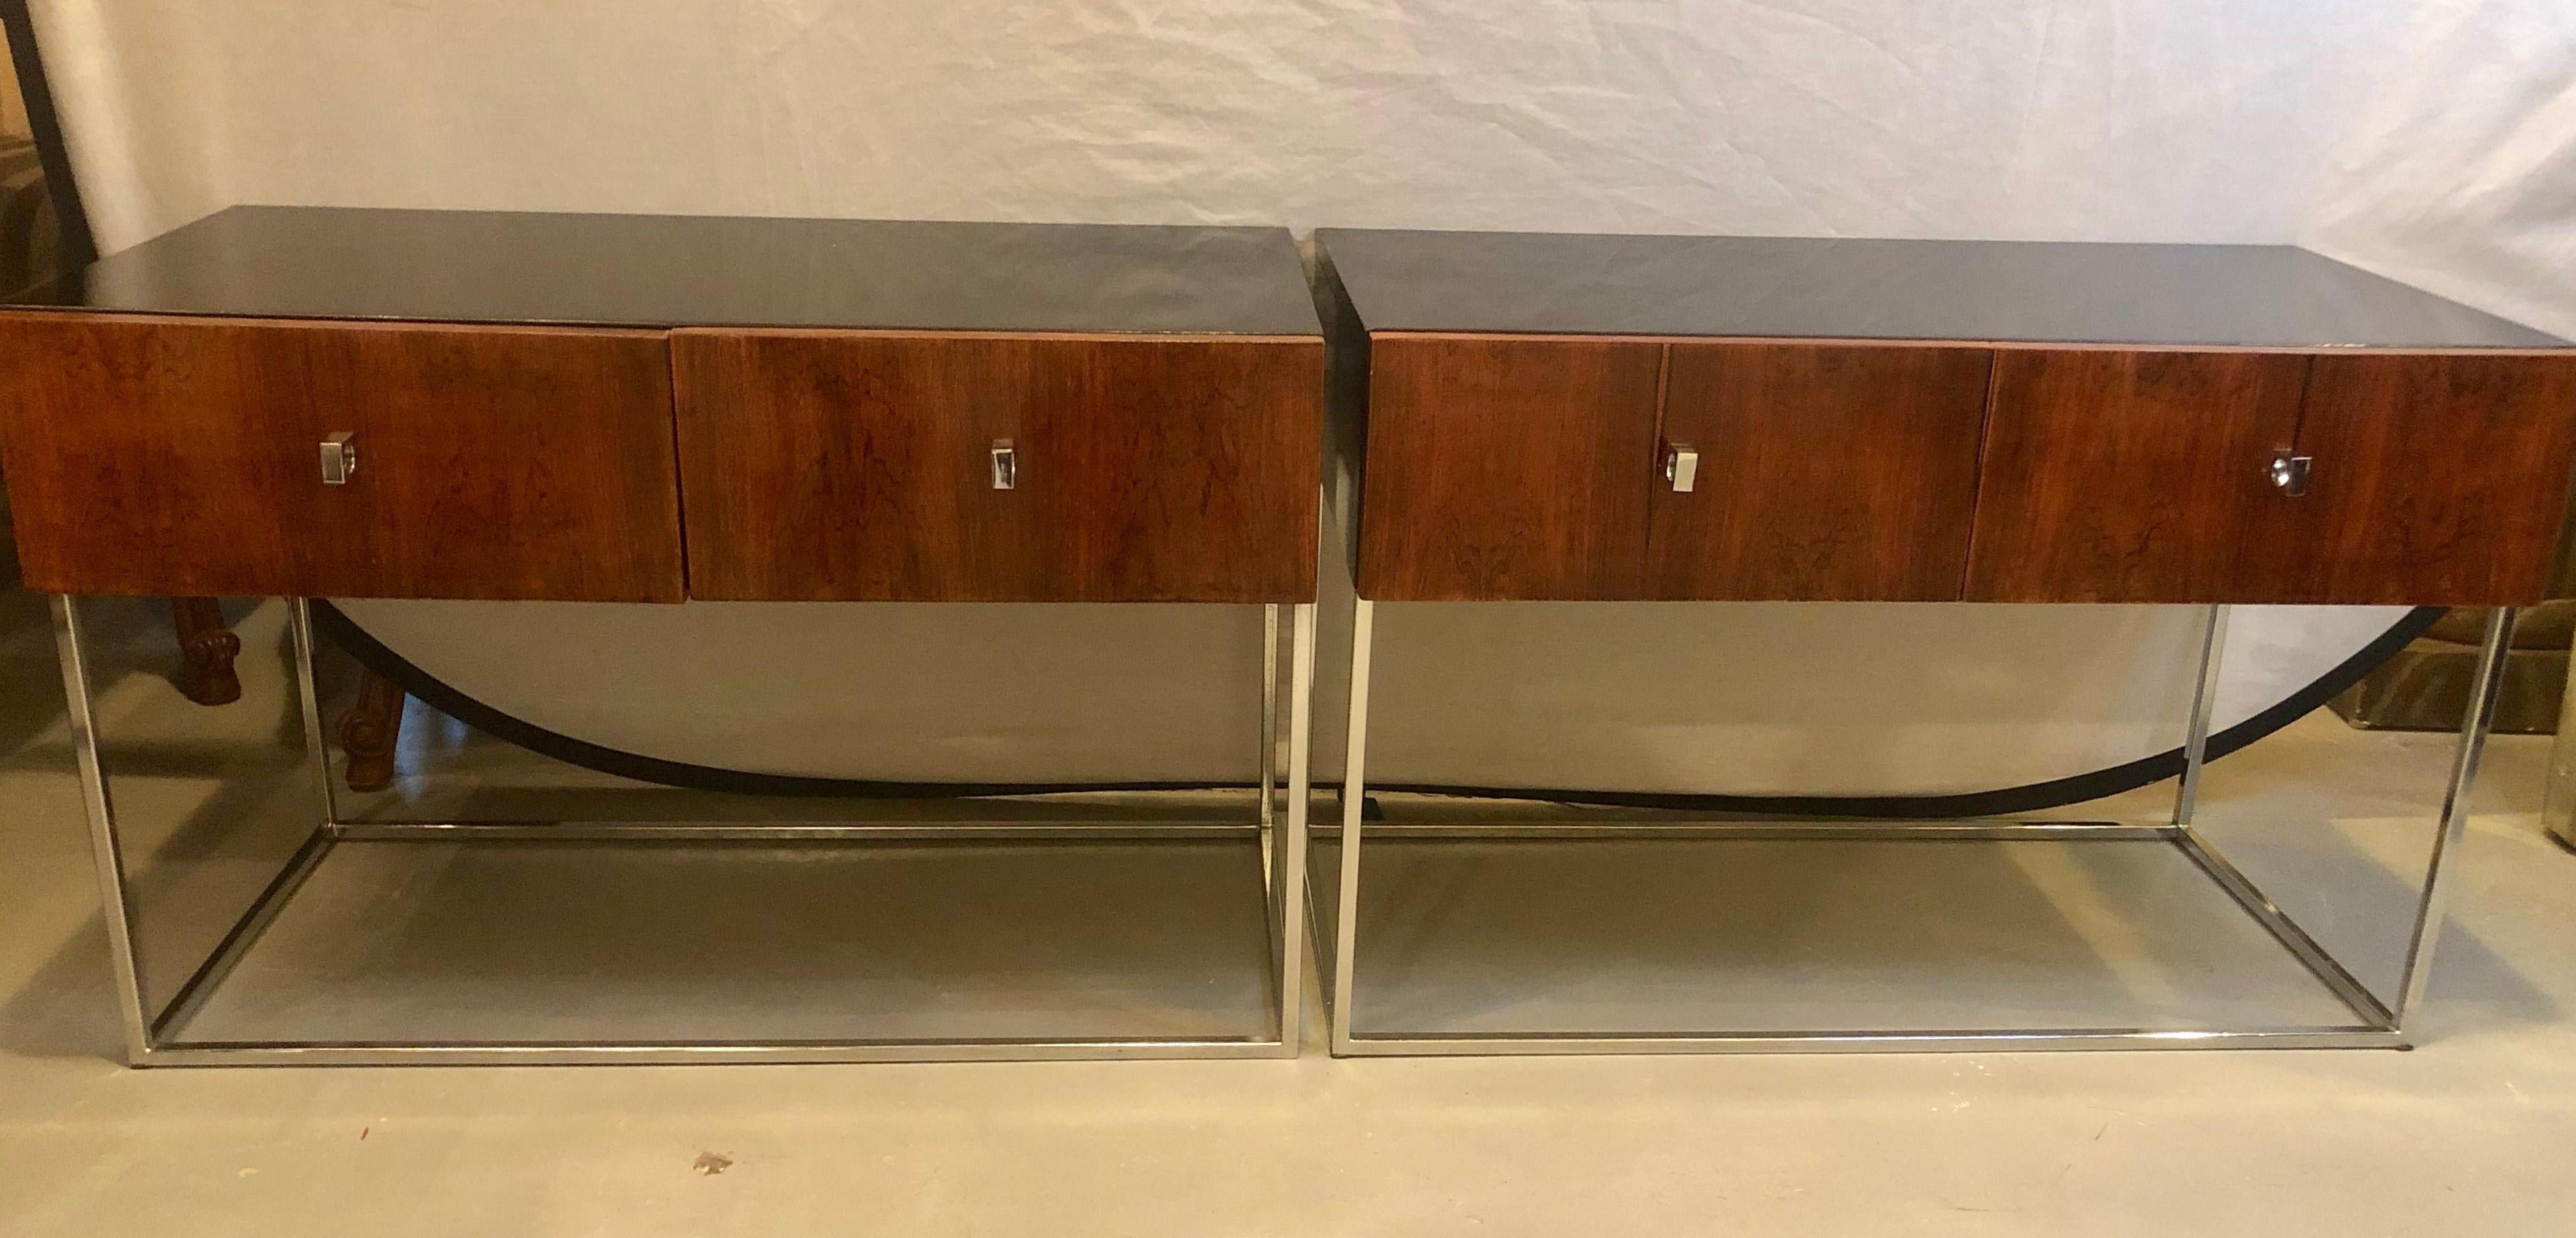 A fine pair of Mid-Century Modern branded 